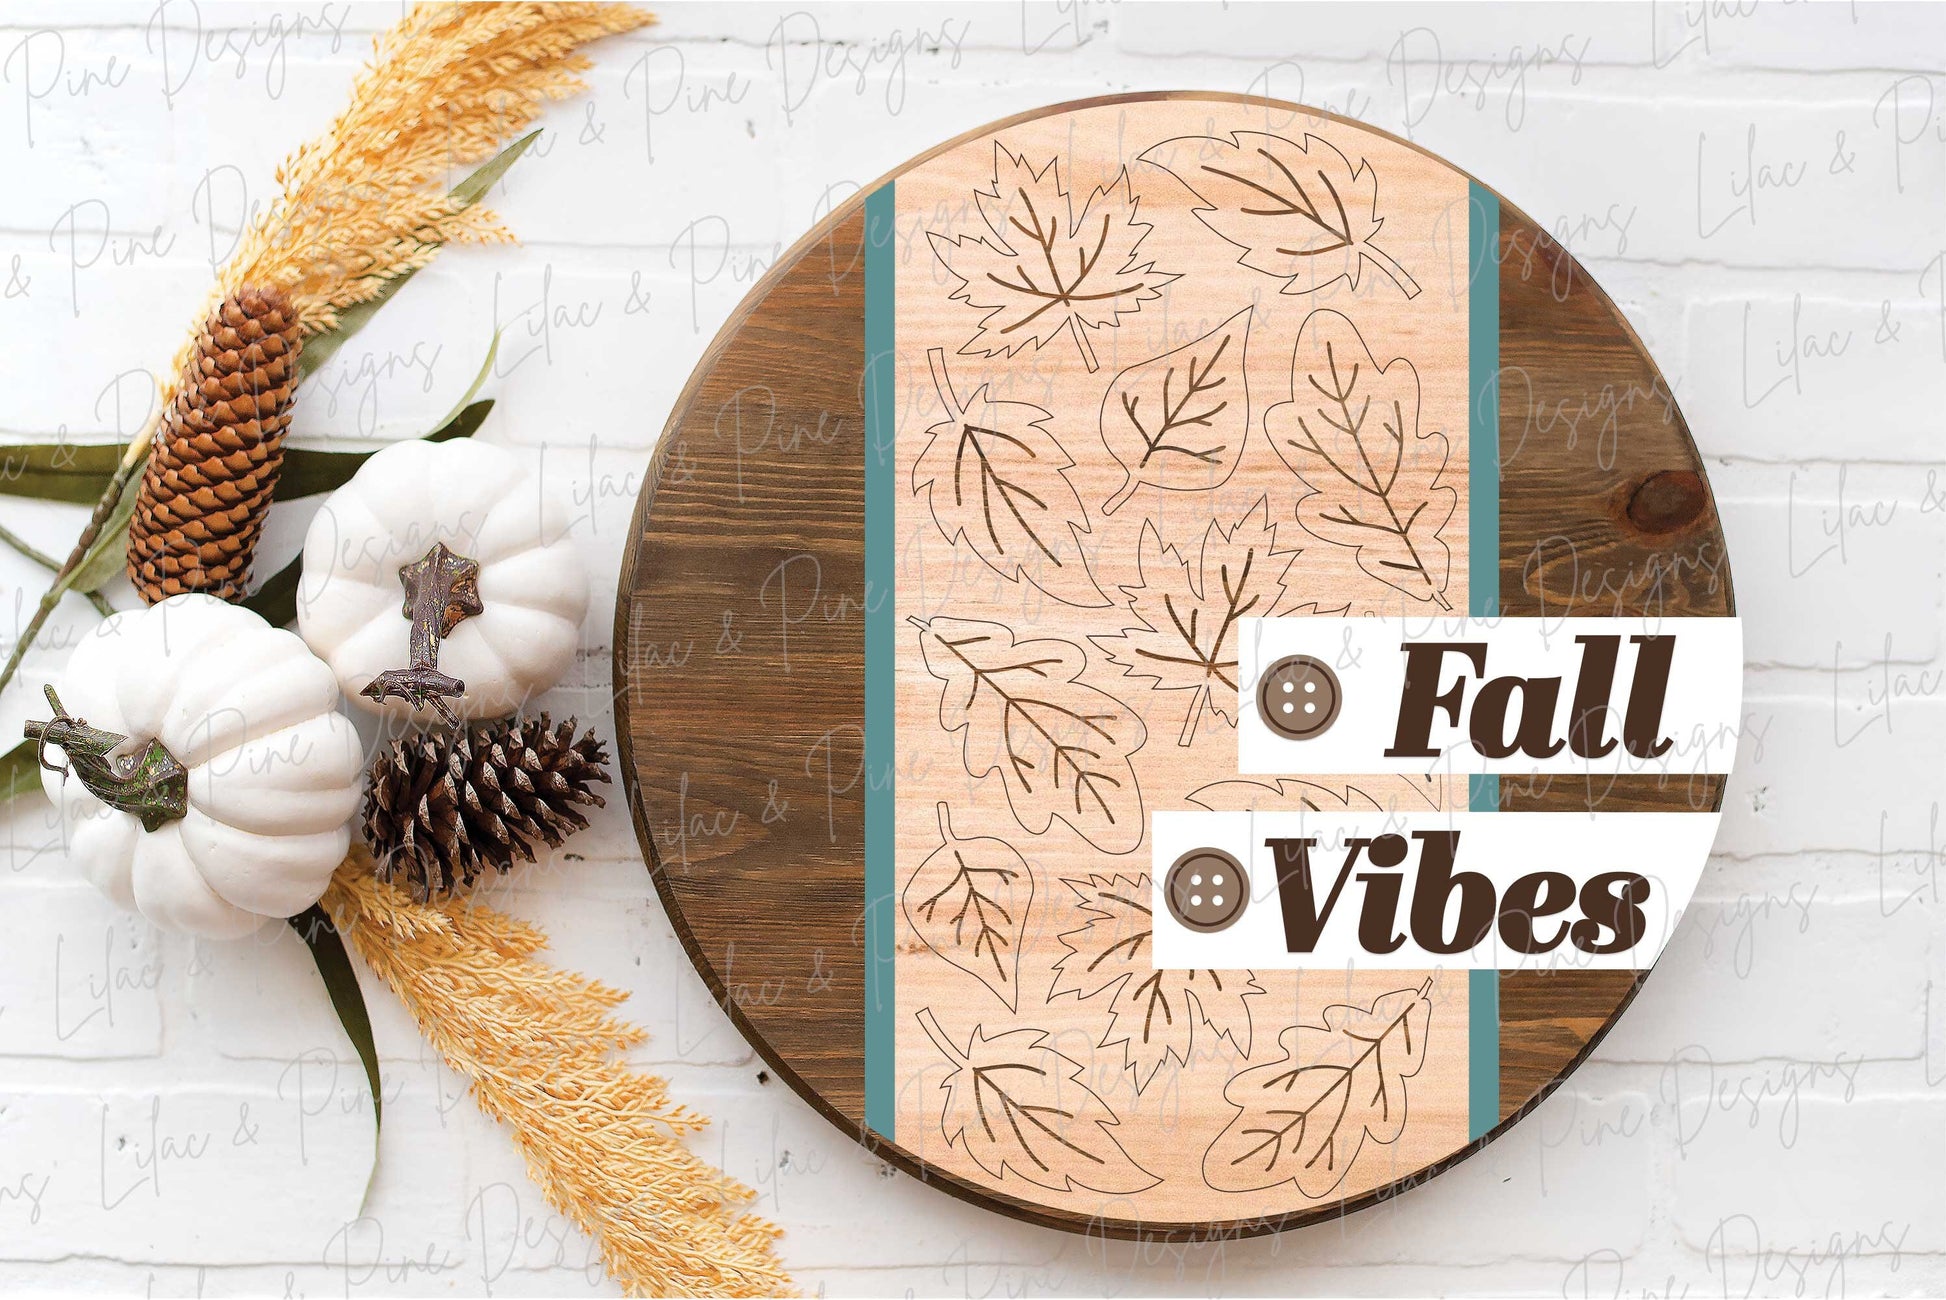 Fall vibes door hanger SVG, Fall welcome sign, leaves door hanger SVG, autumn decor, fall round wood sign, Glowforge SVG, laser cut file